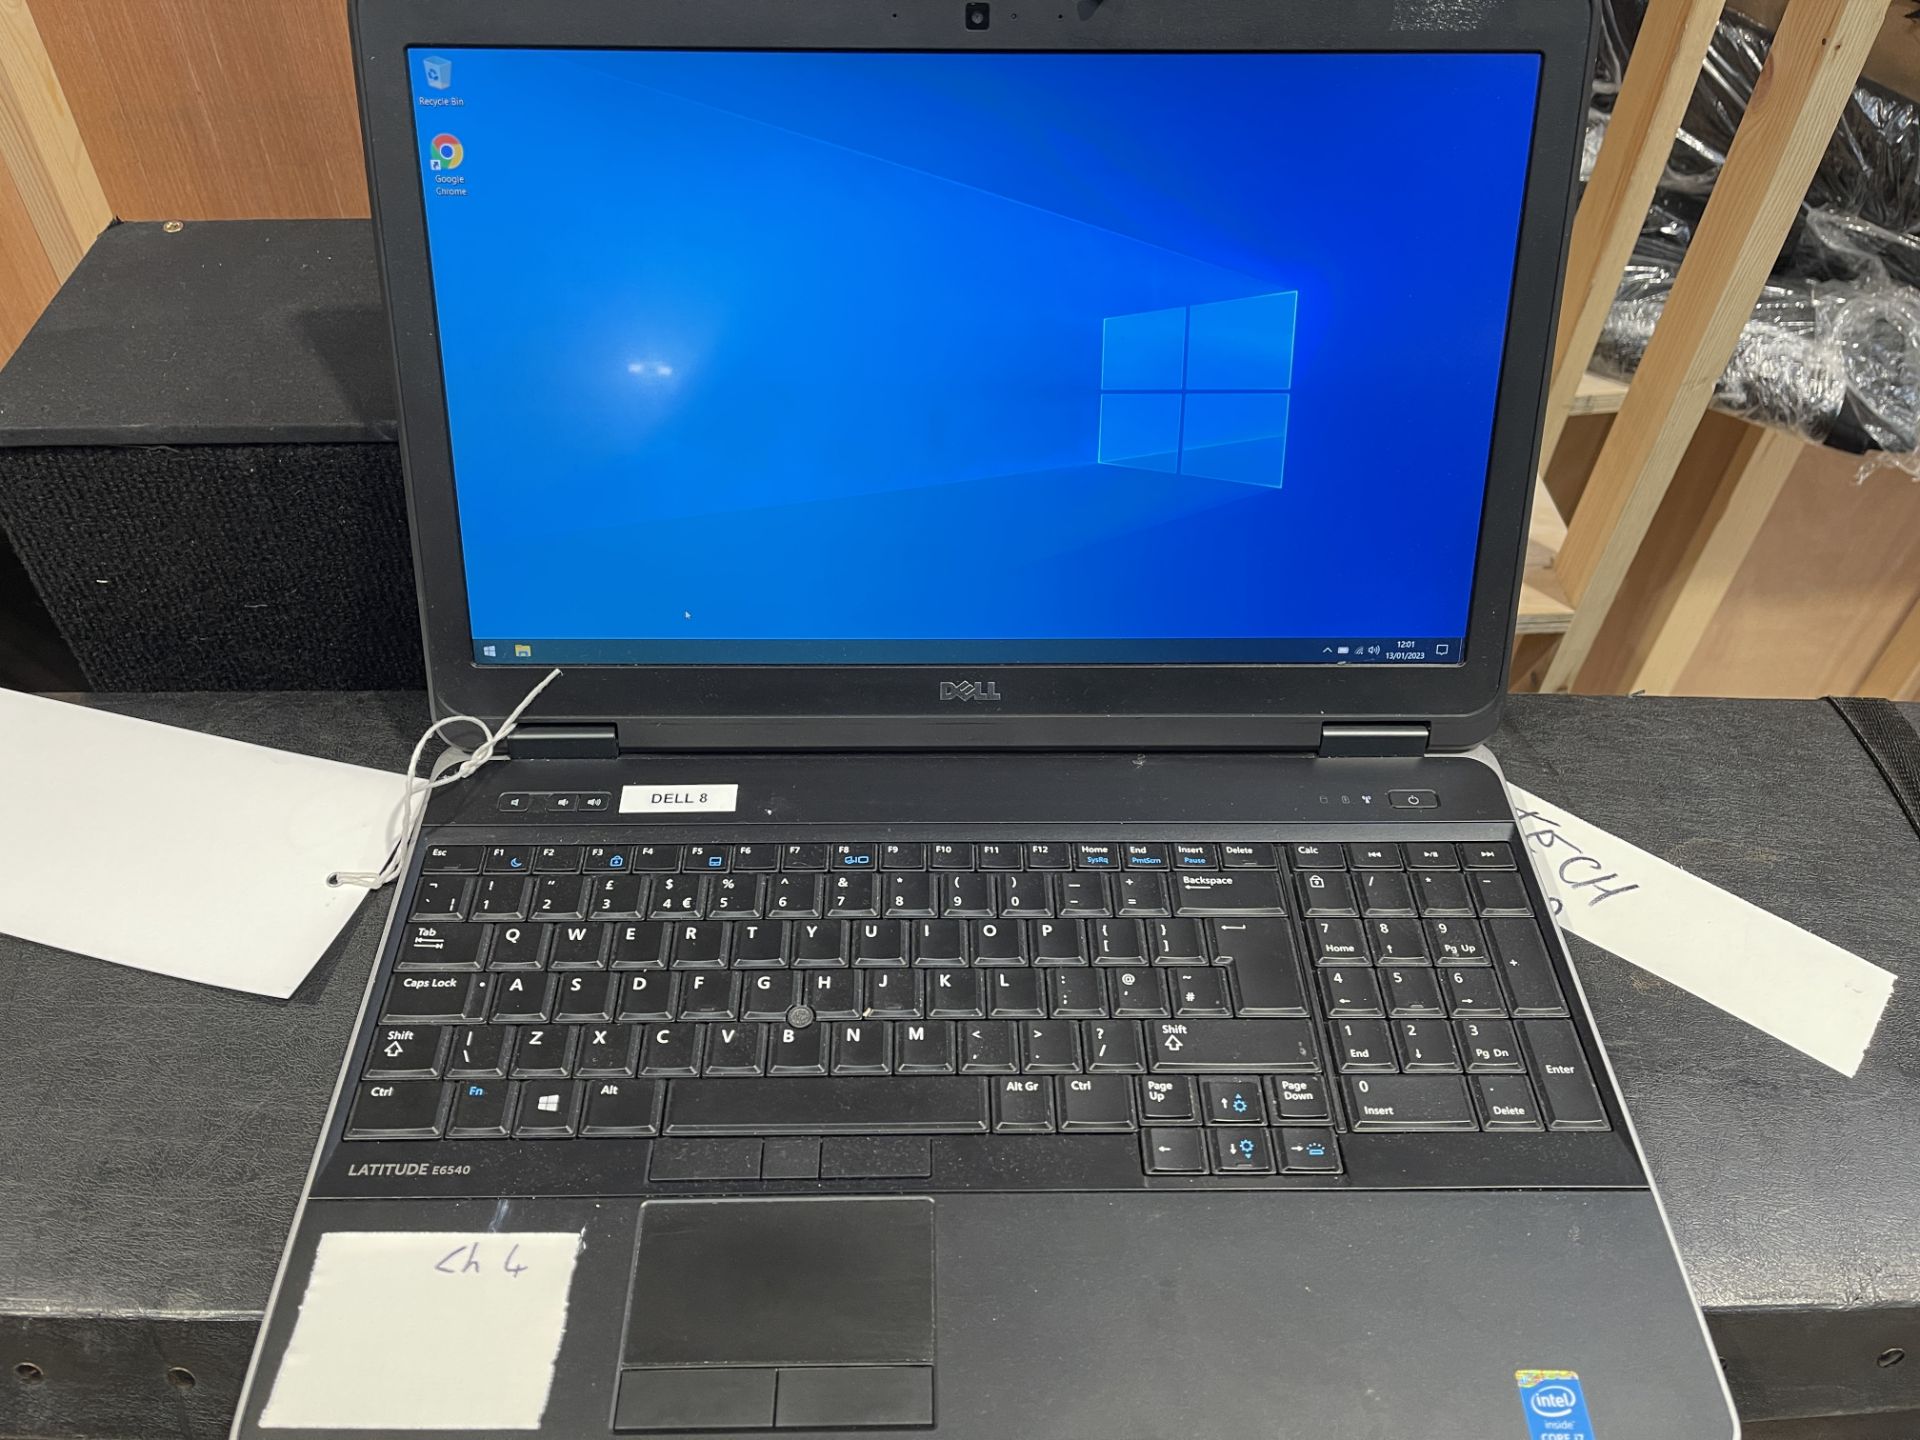 A Dell Latitude E6540 15.6 Lap Top Computer (Located at Equip Event Services: 1 Somers Place, - Image 2 of 2